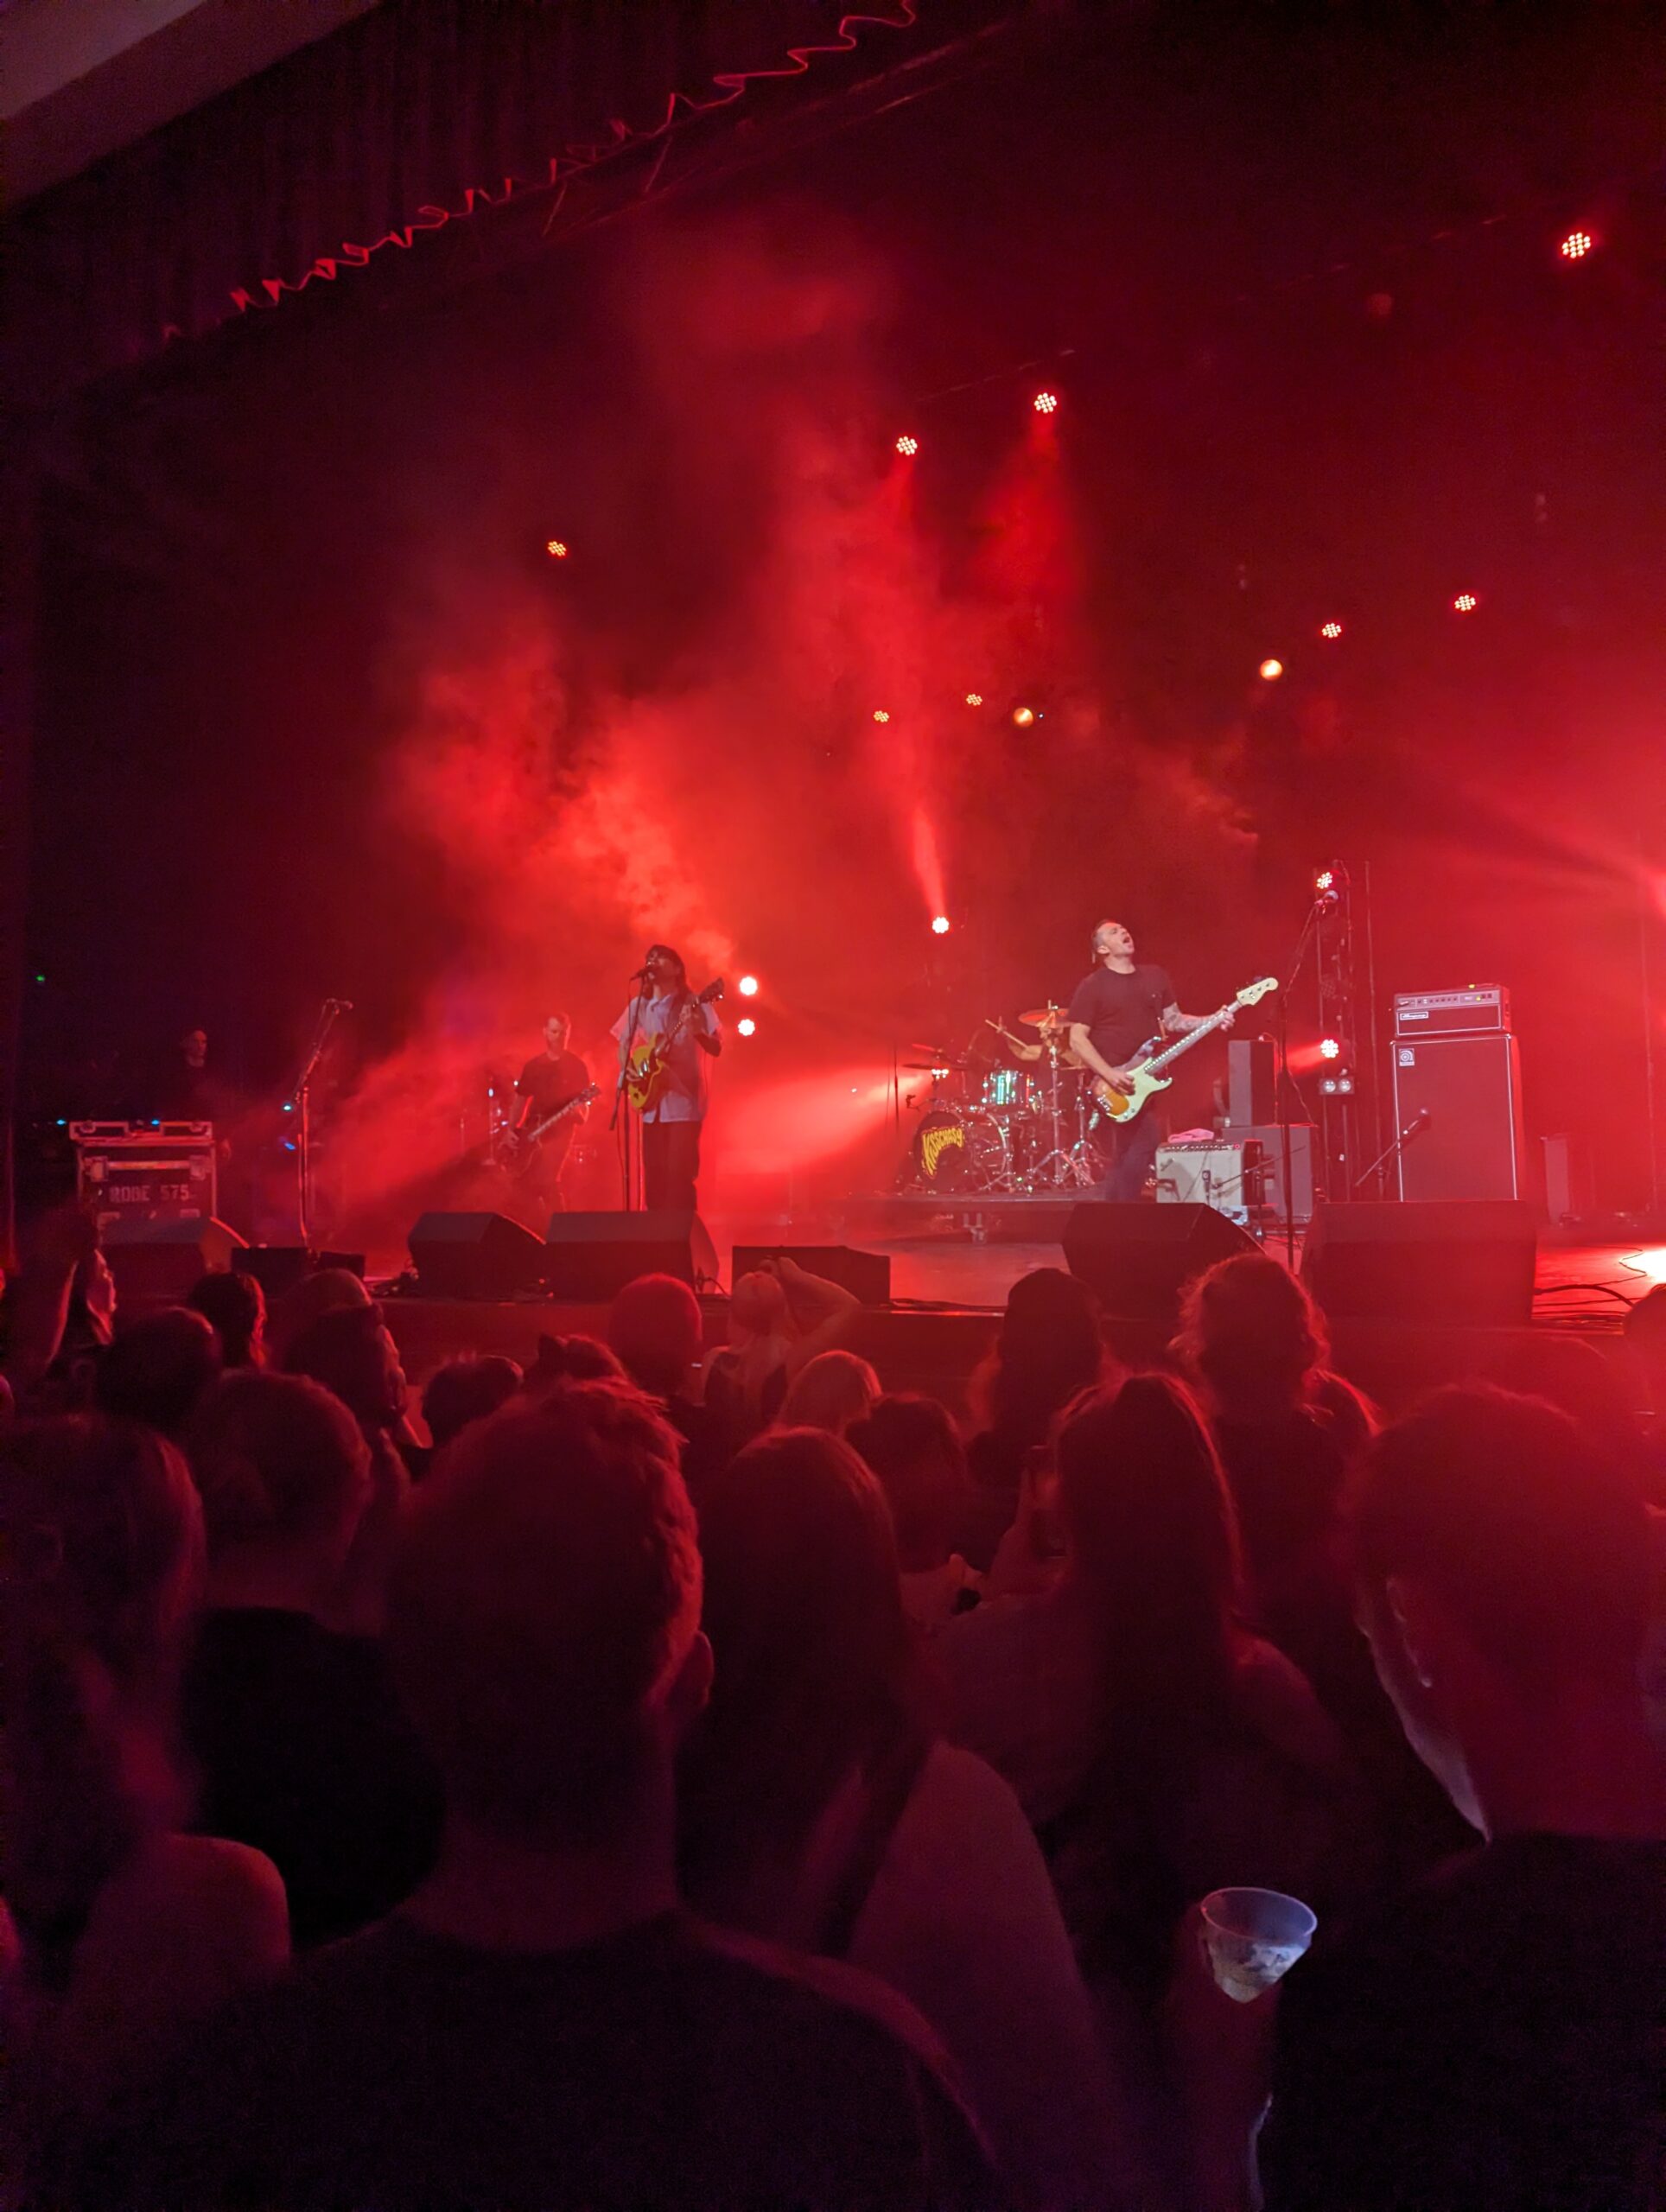 A band playing a gig in front of a crowd, bathed in red stage lights